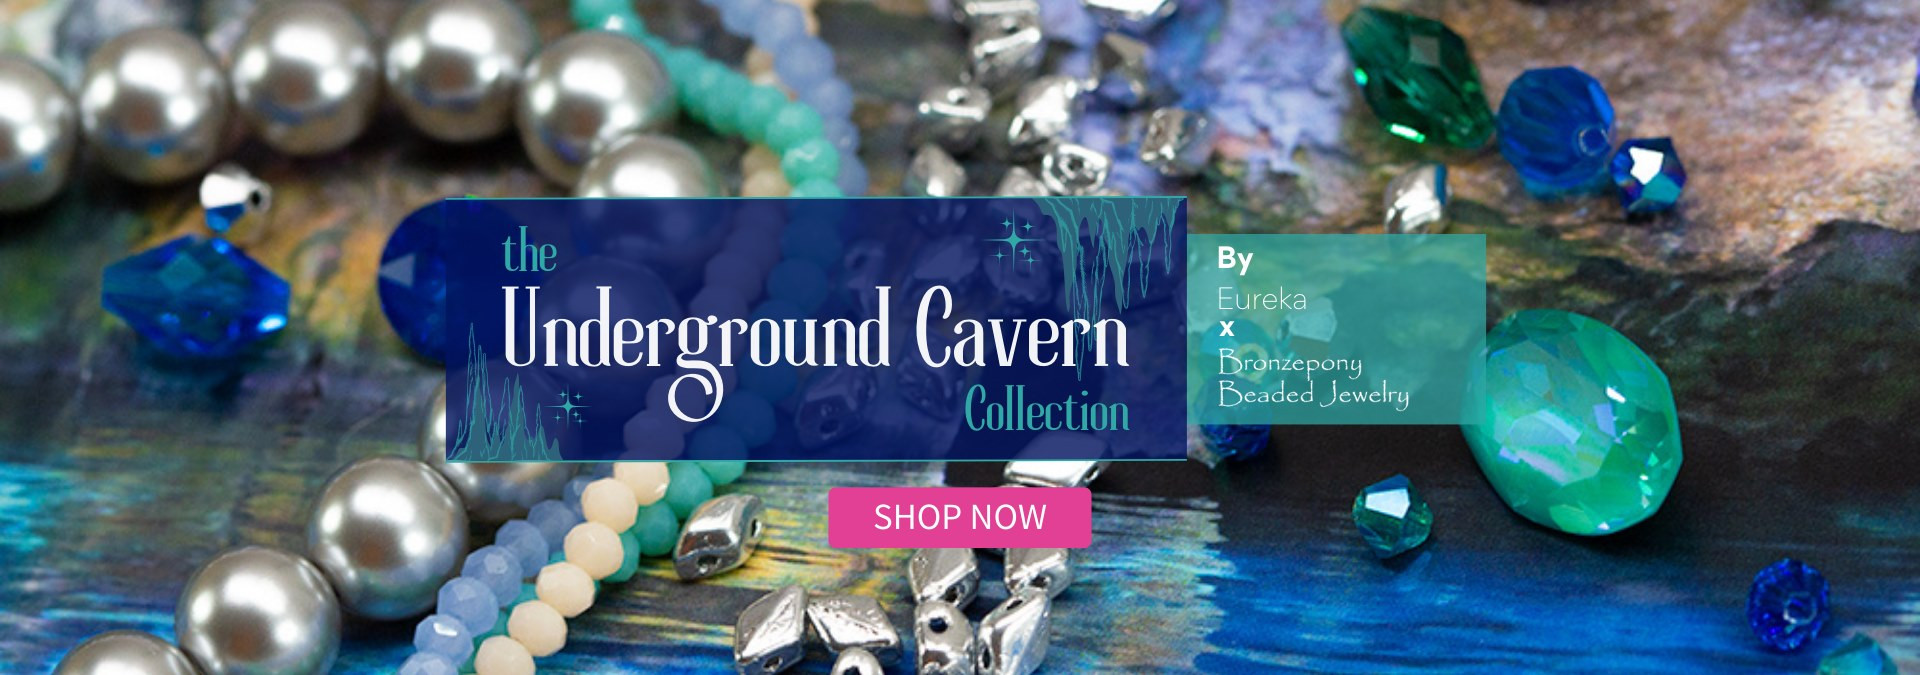 Get the new Underground Cavern Collection by Eureka x Bronzepony!